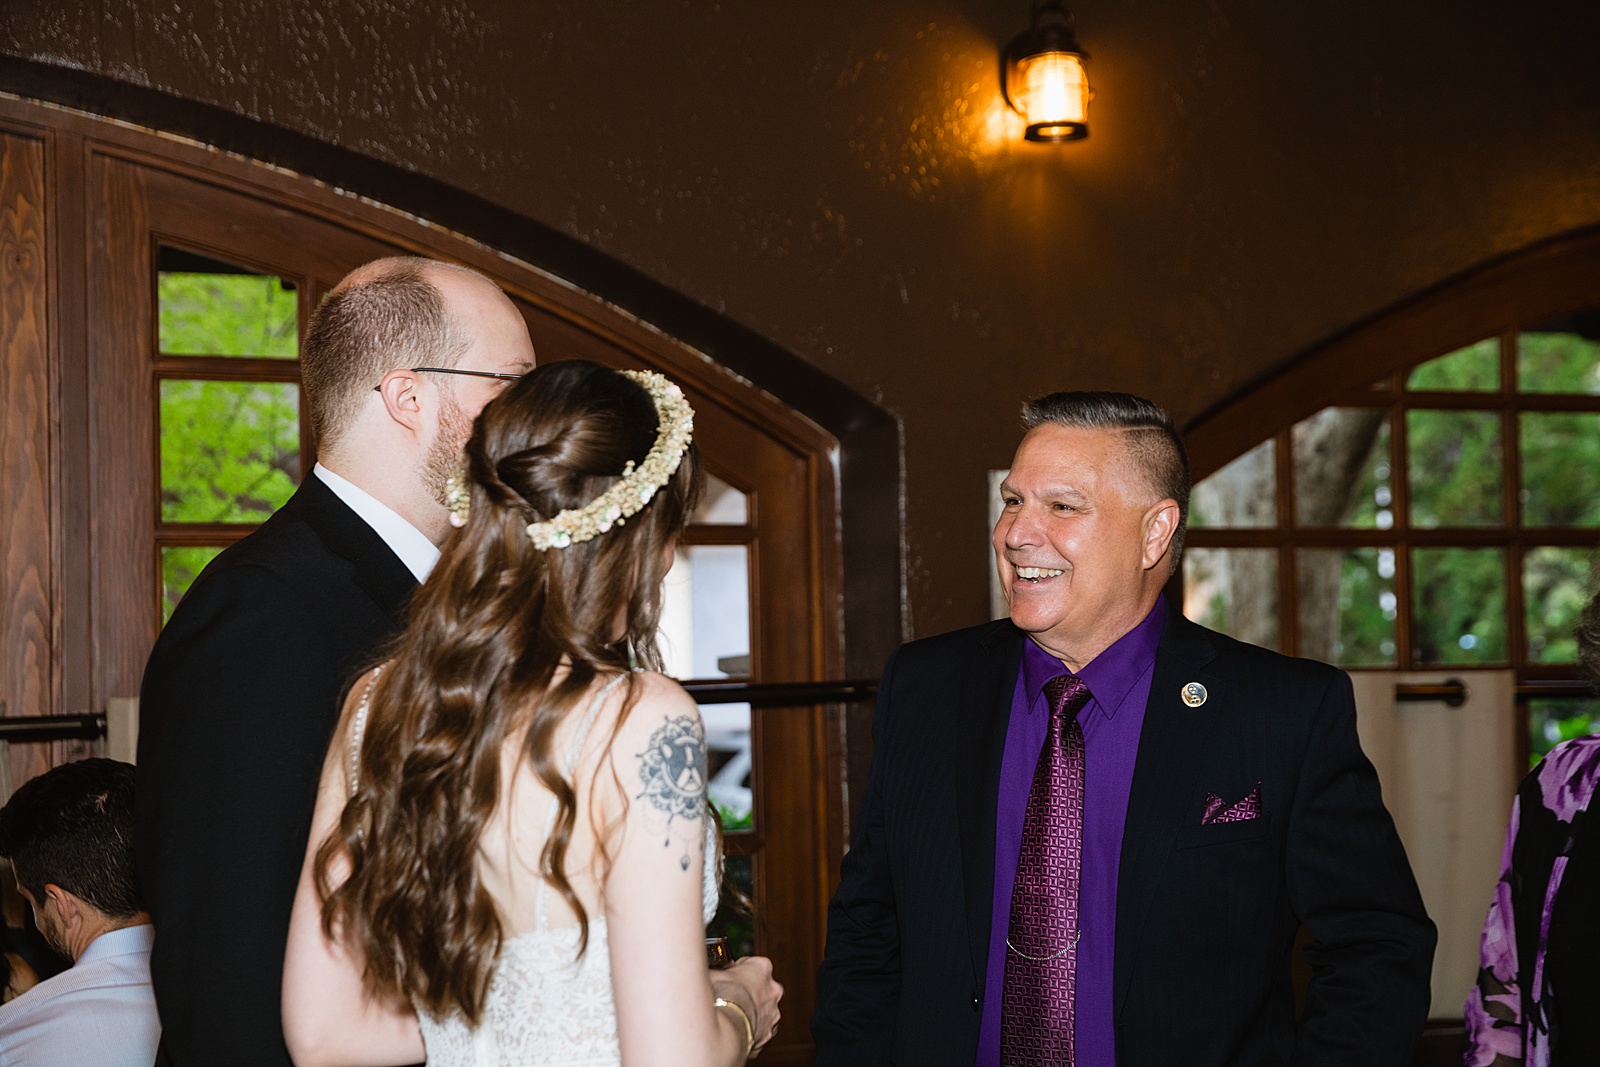 Bride and Groom with guests at Timo Wood Oven Wine Bar wedding reception by Sedona wedding photographer PMA Photography